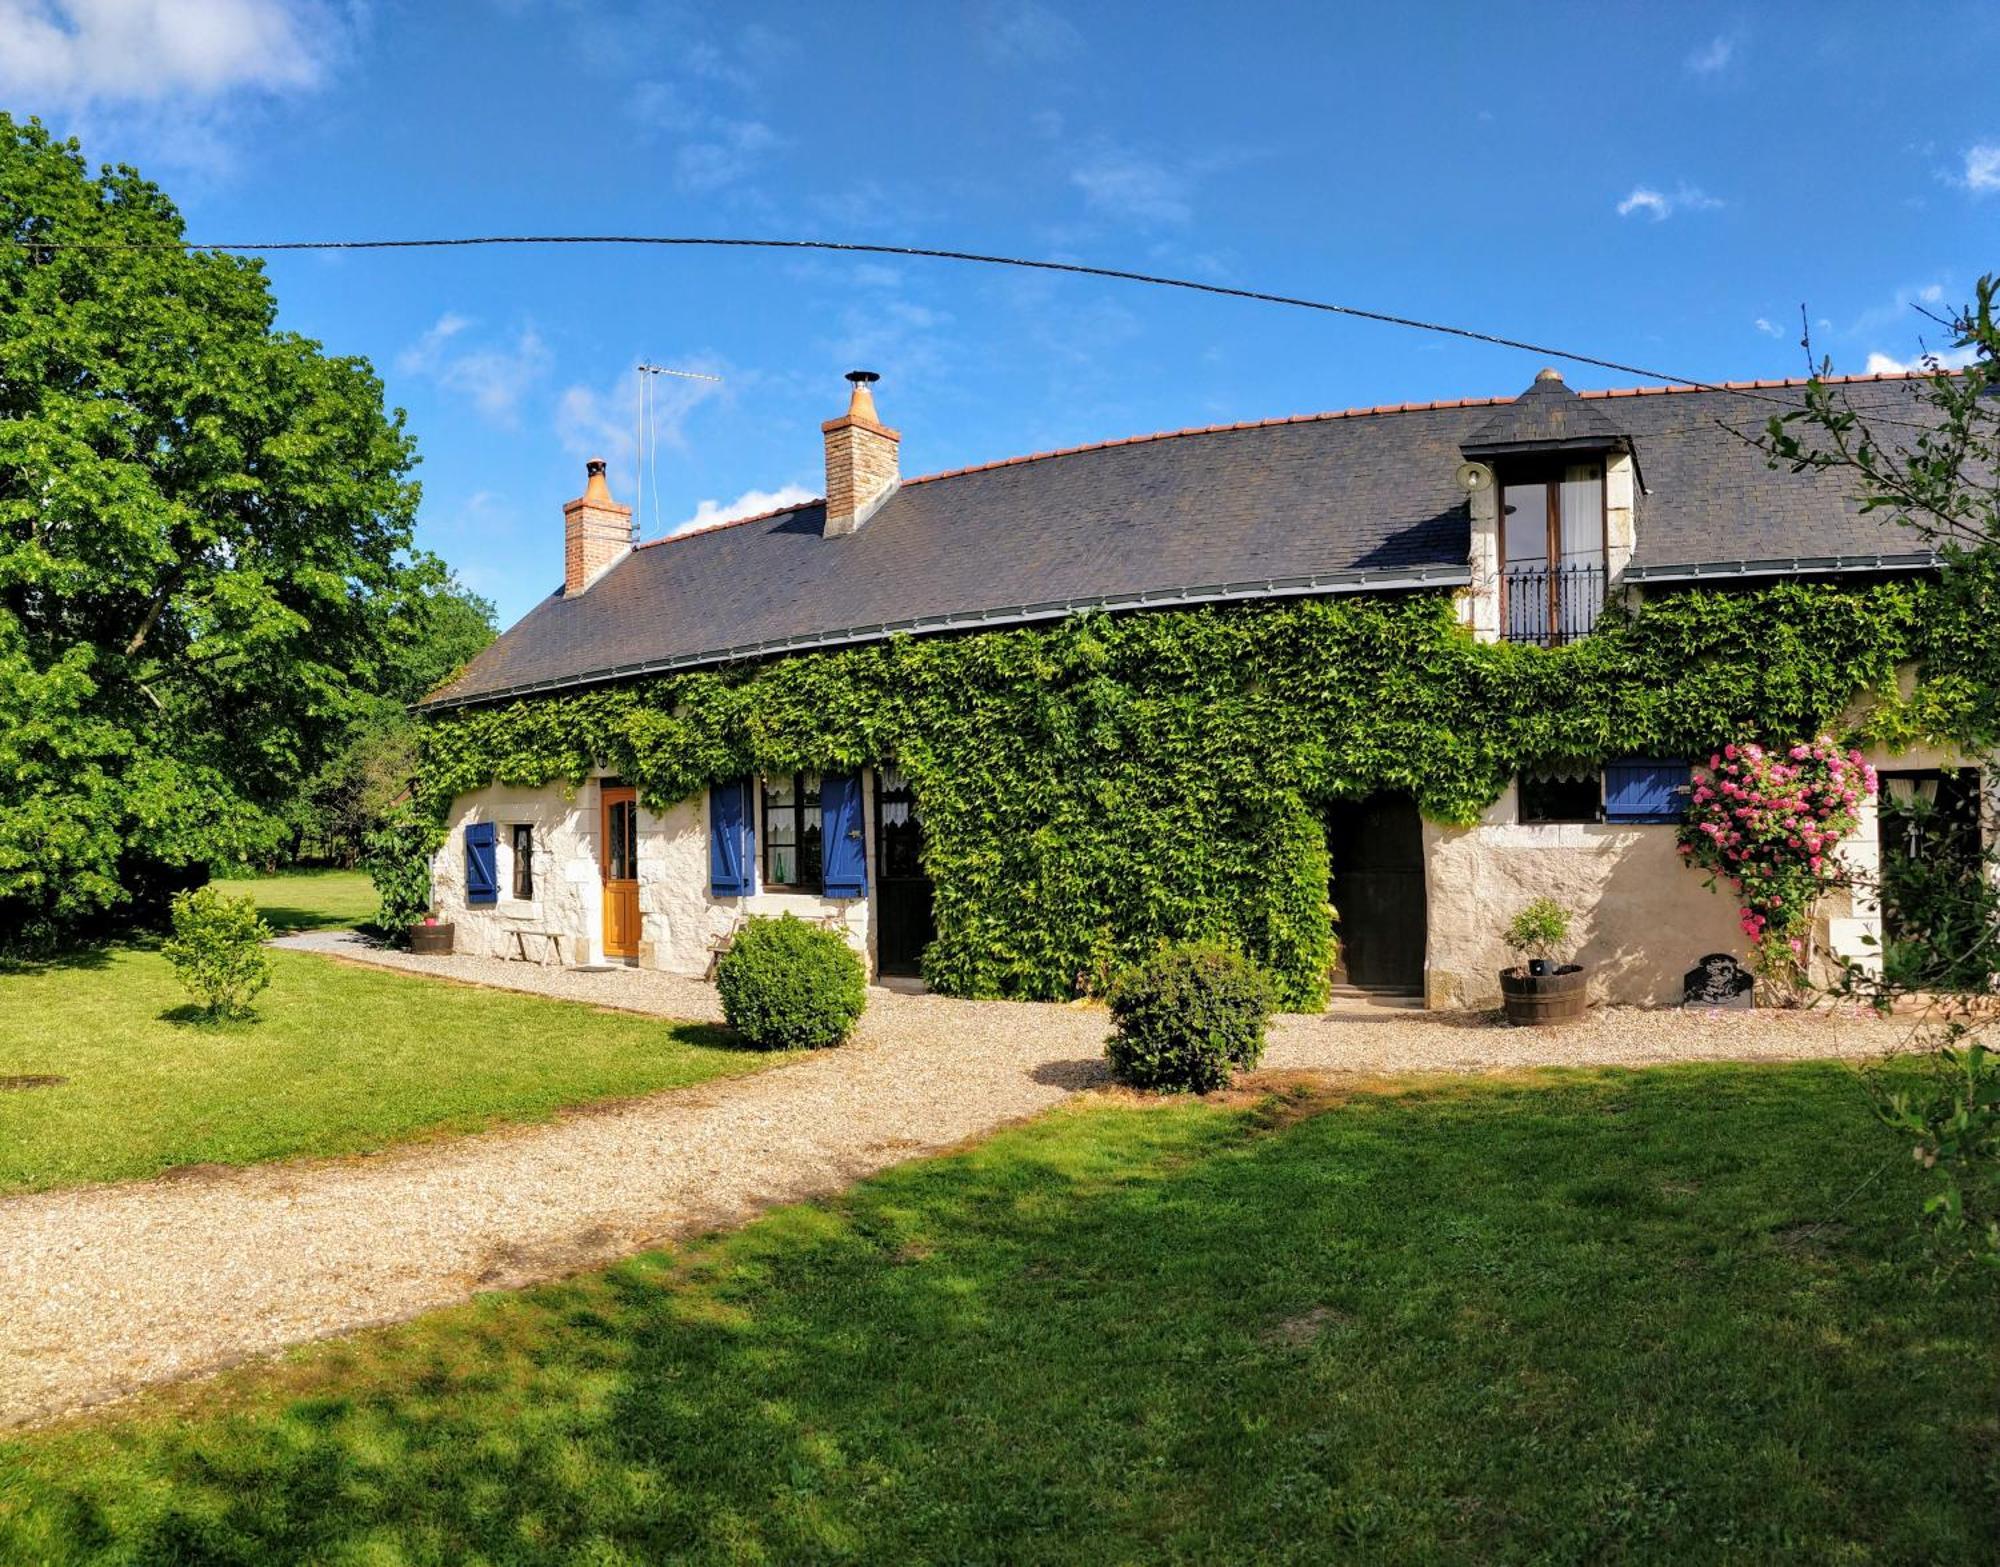 Traditional Longere Farmhouse At La Fortinerie Mouliherne 外观 照片